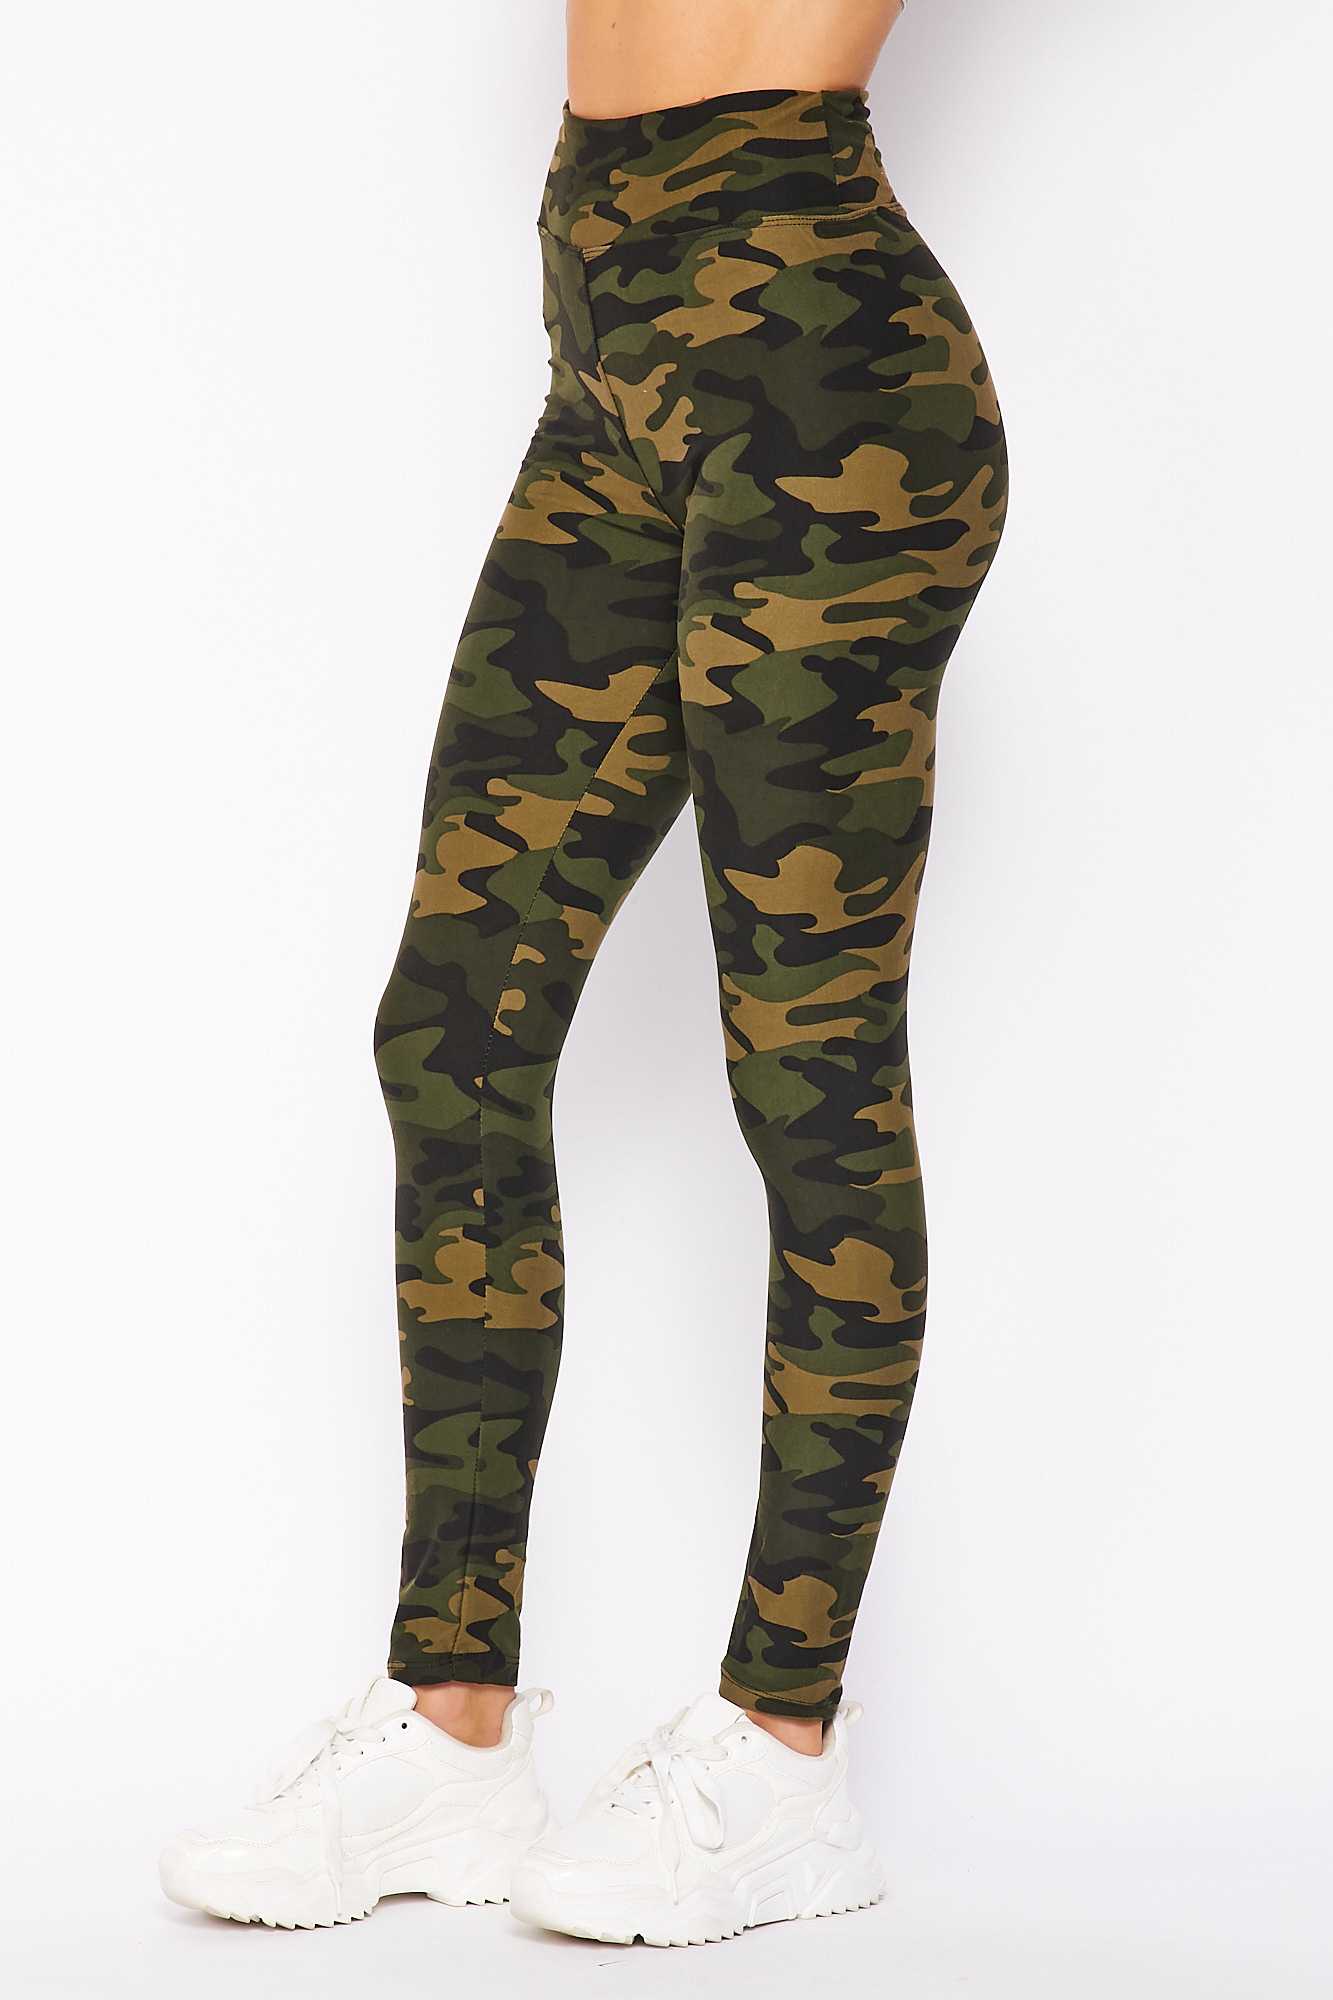 Wholesale Buttery Smooth Olive Green Camouflage High Waist Leggings